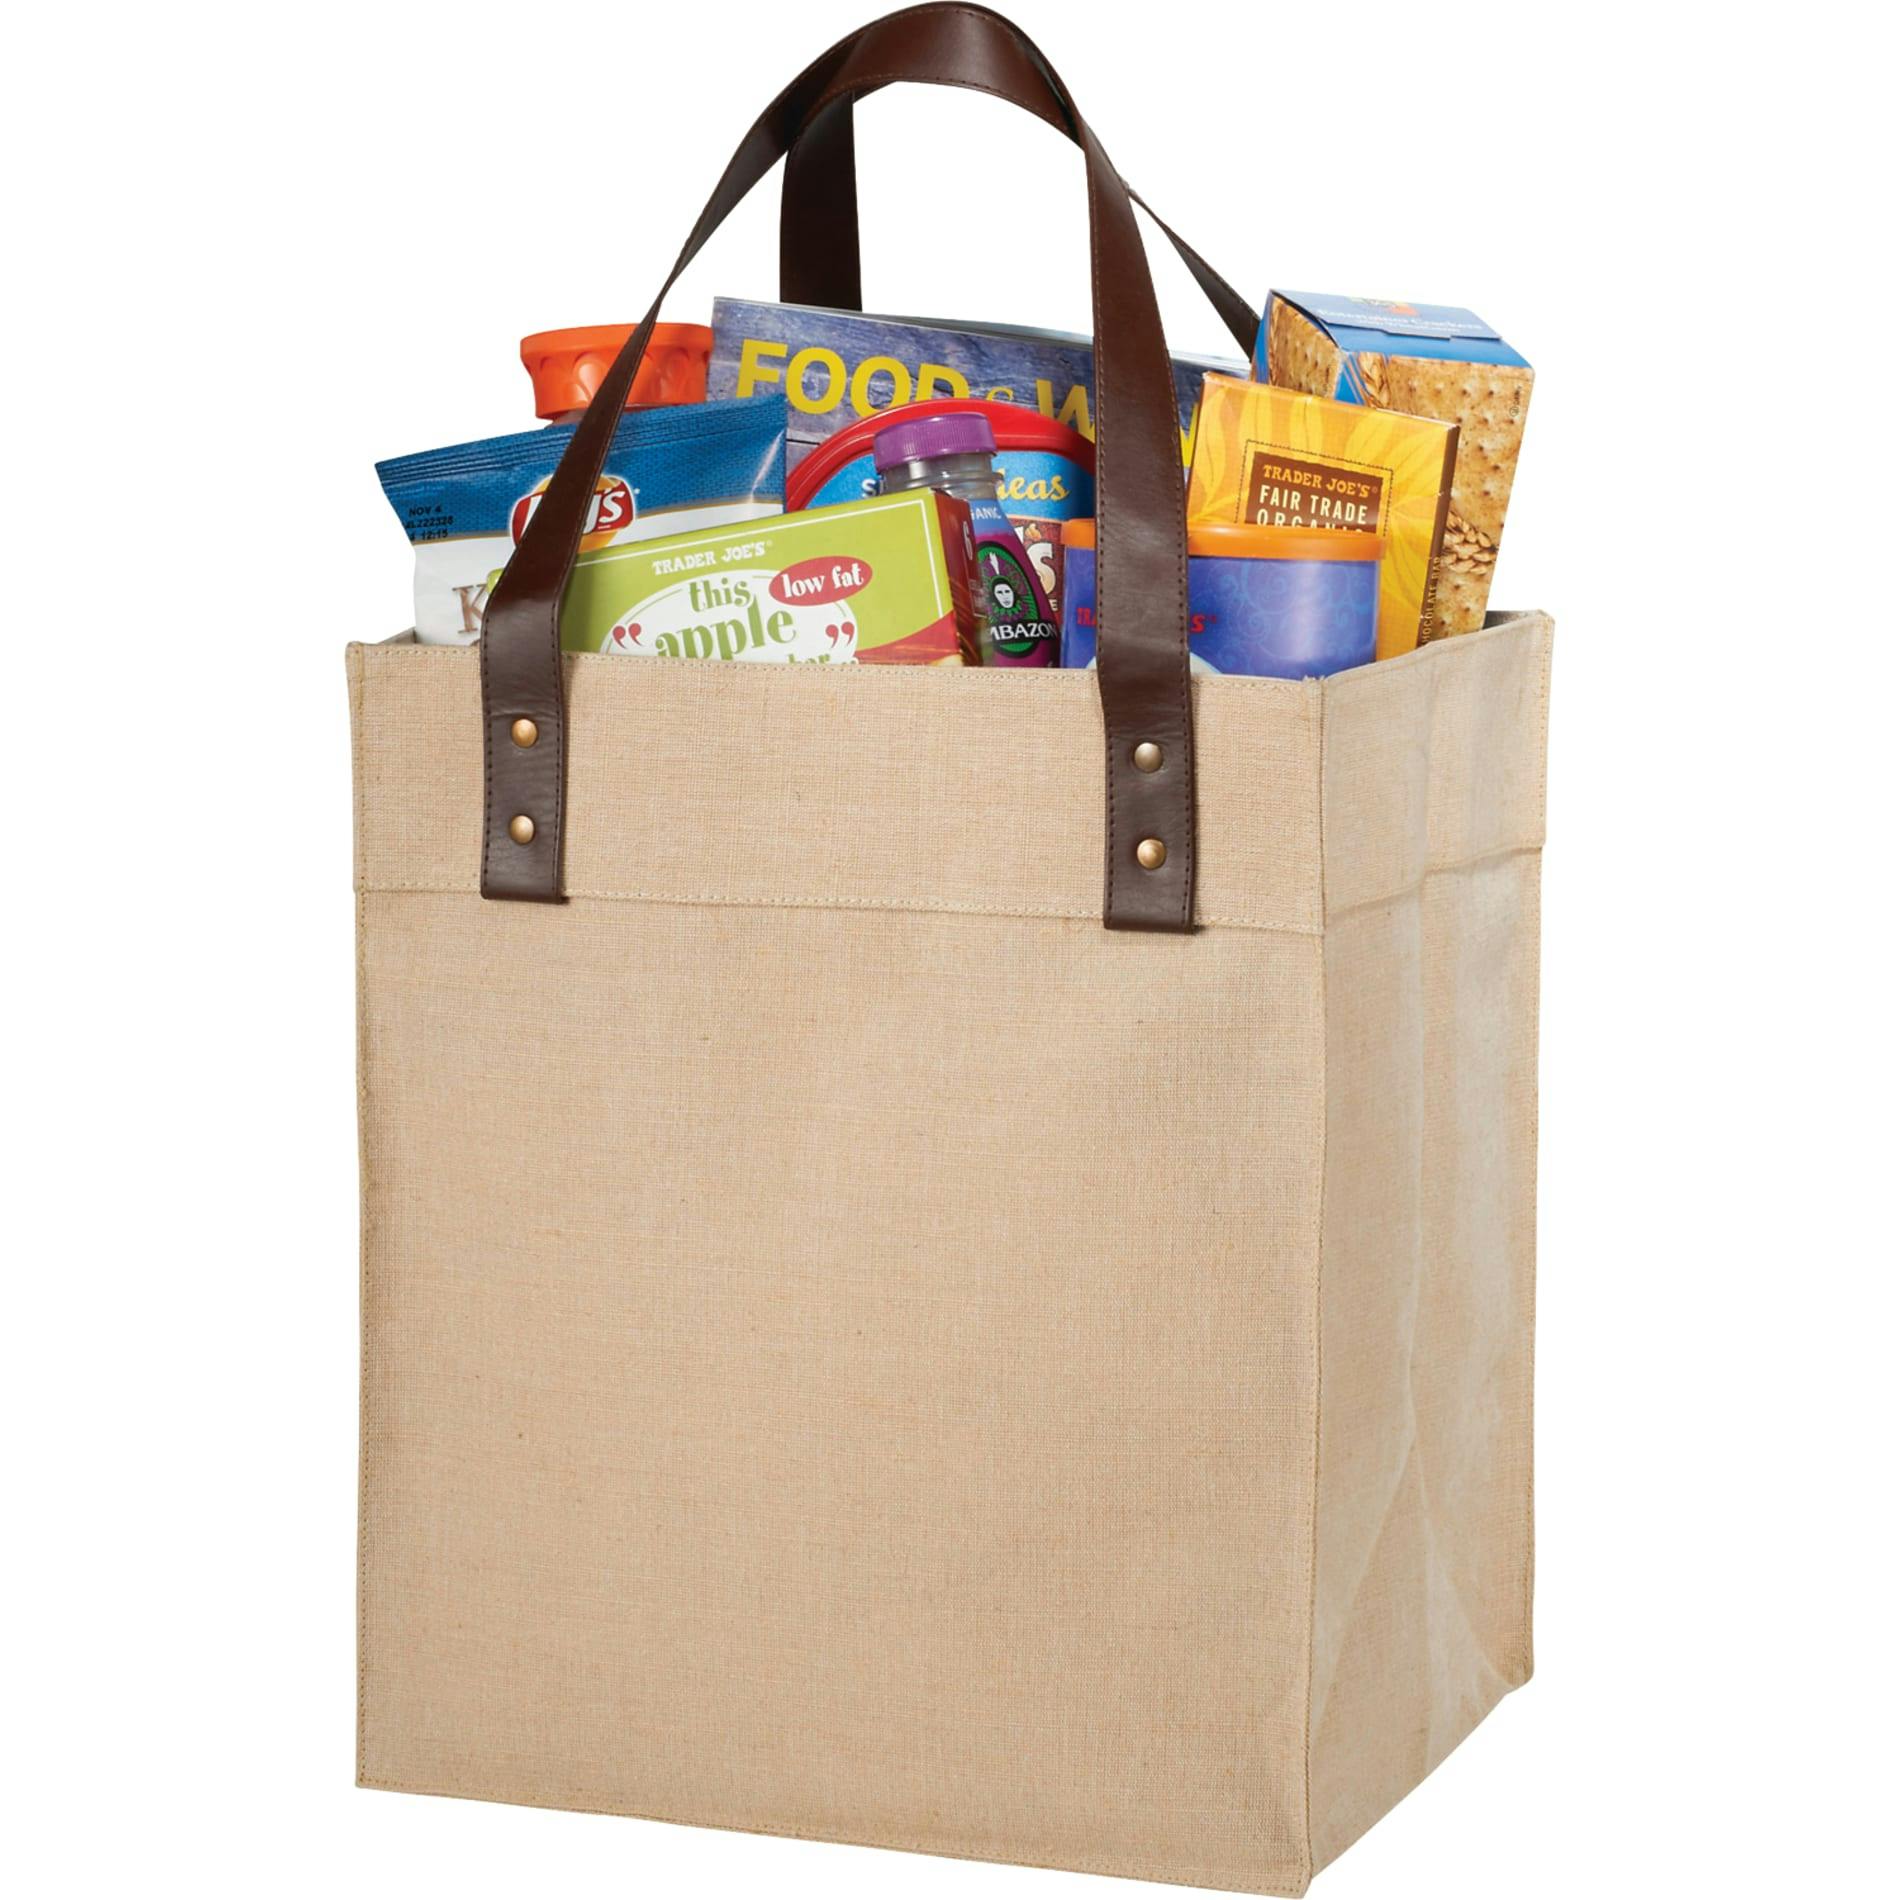 Westover Premium Grocery Tote - additional Image 2